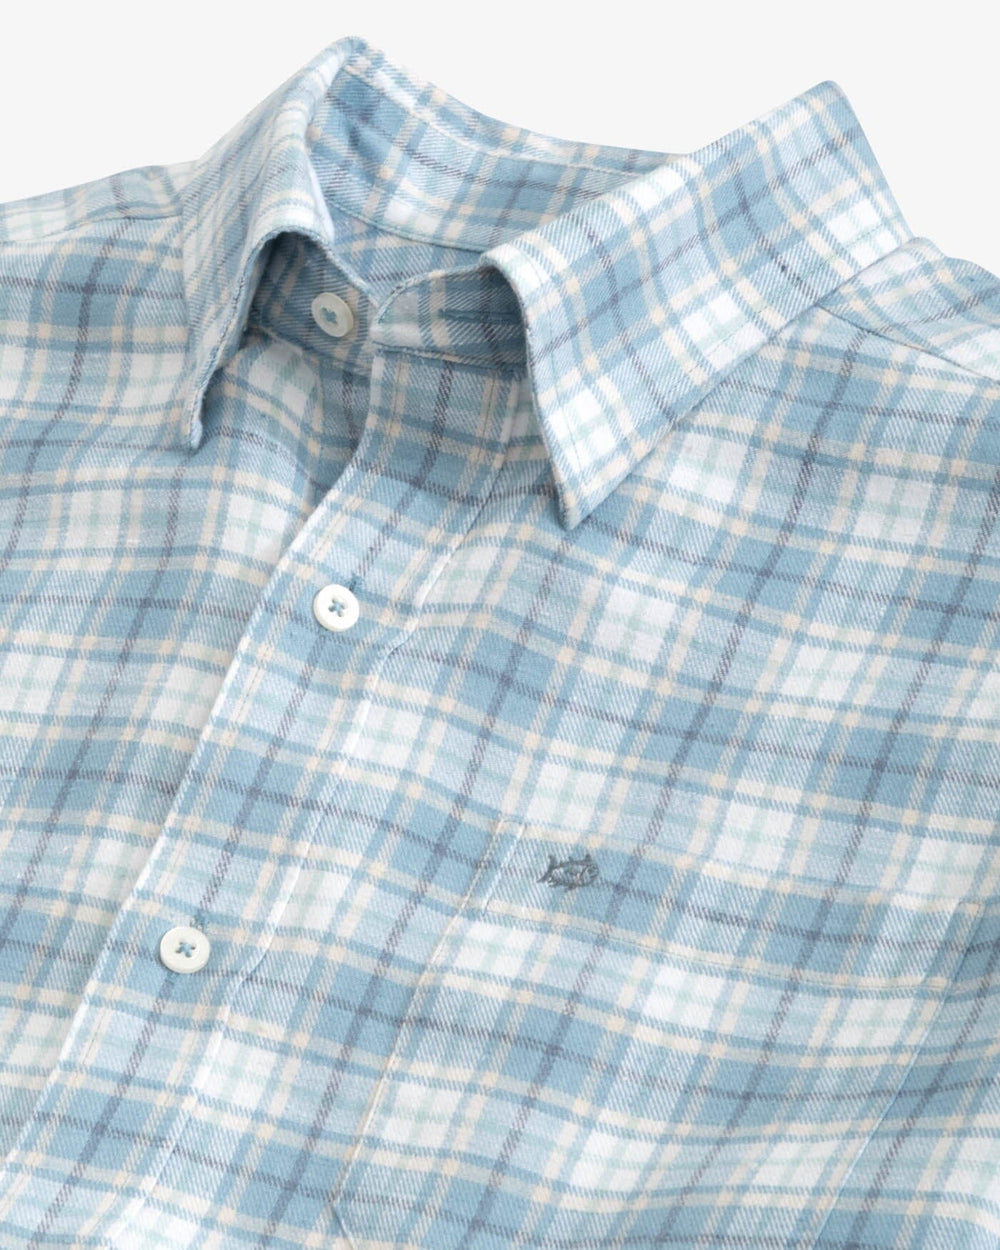 The detail view of the Southern Tide Beach Flannel Heather Howland Plaid Sport Shirt by Southern Tide - Heather Mountain Spring Blue